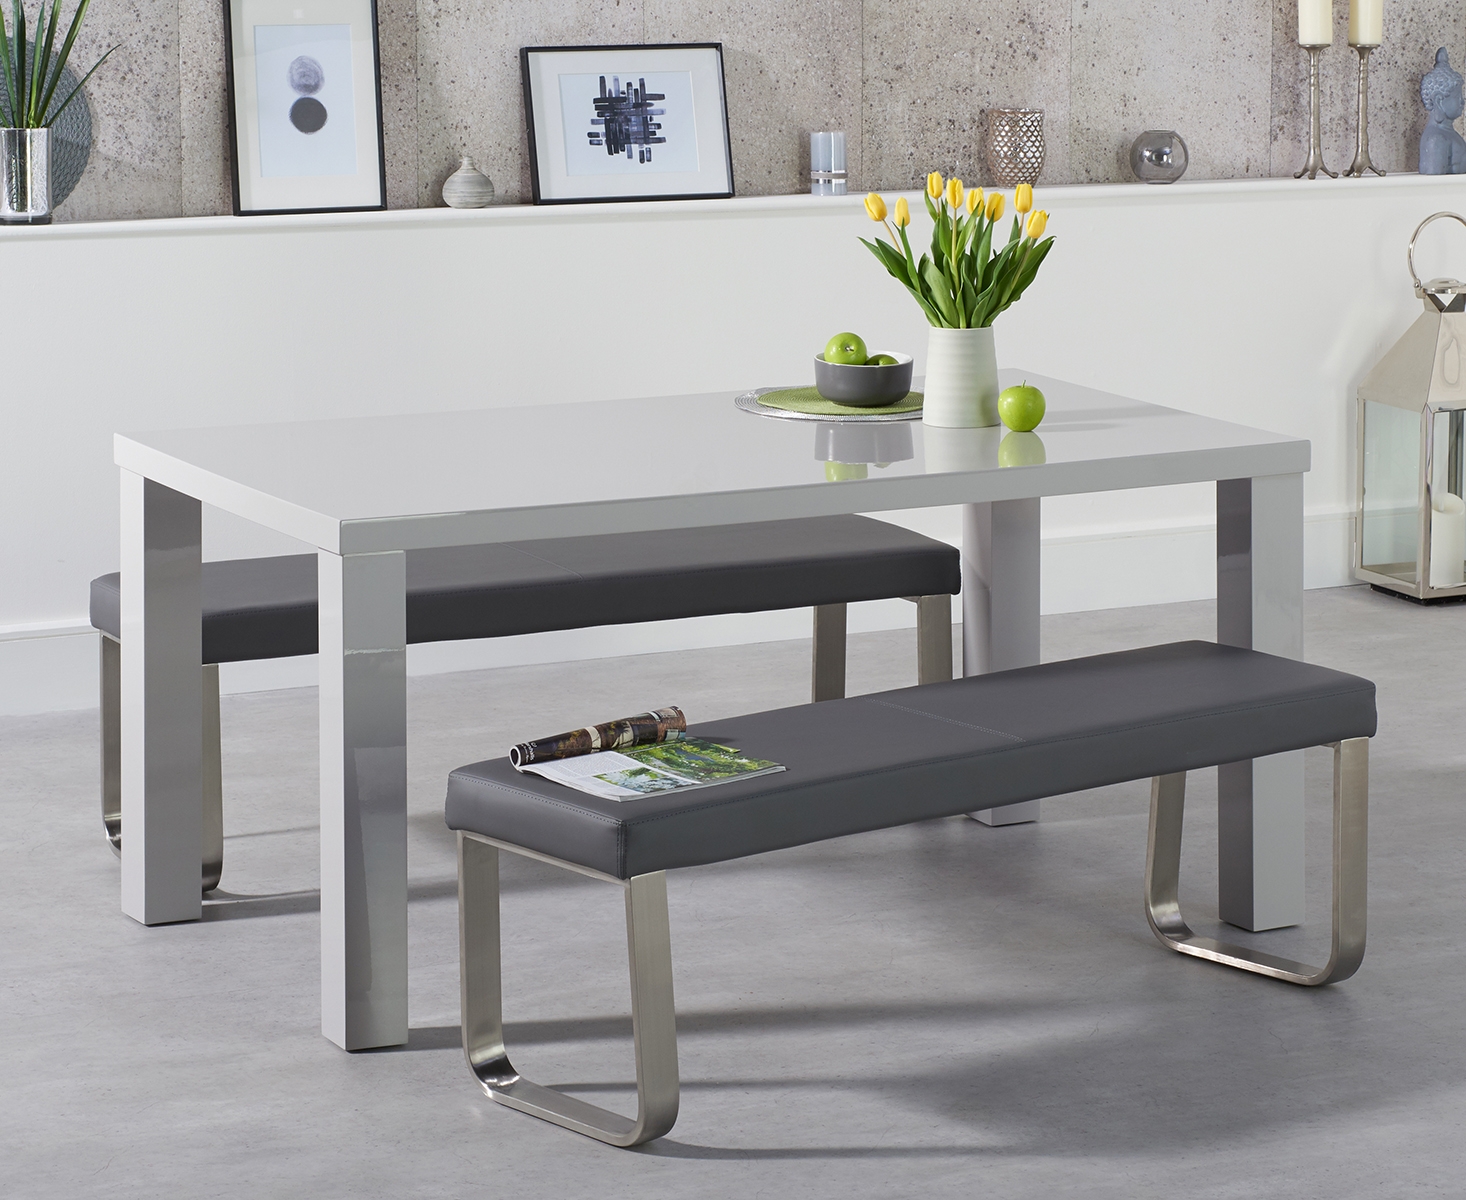 Photo 1 of Seattle 160cm light grey high gloss dining table with 2 grey benches